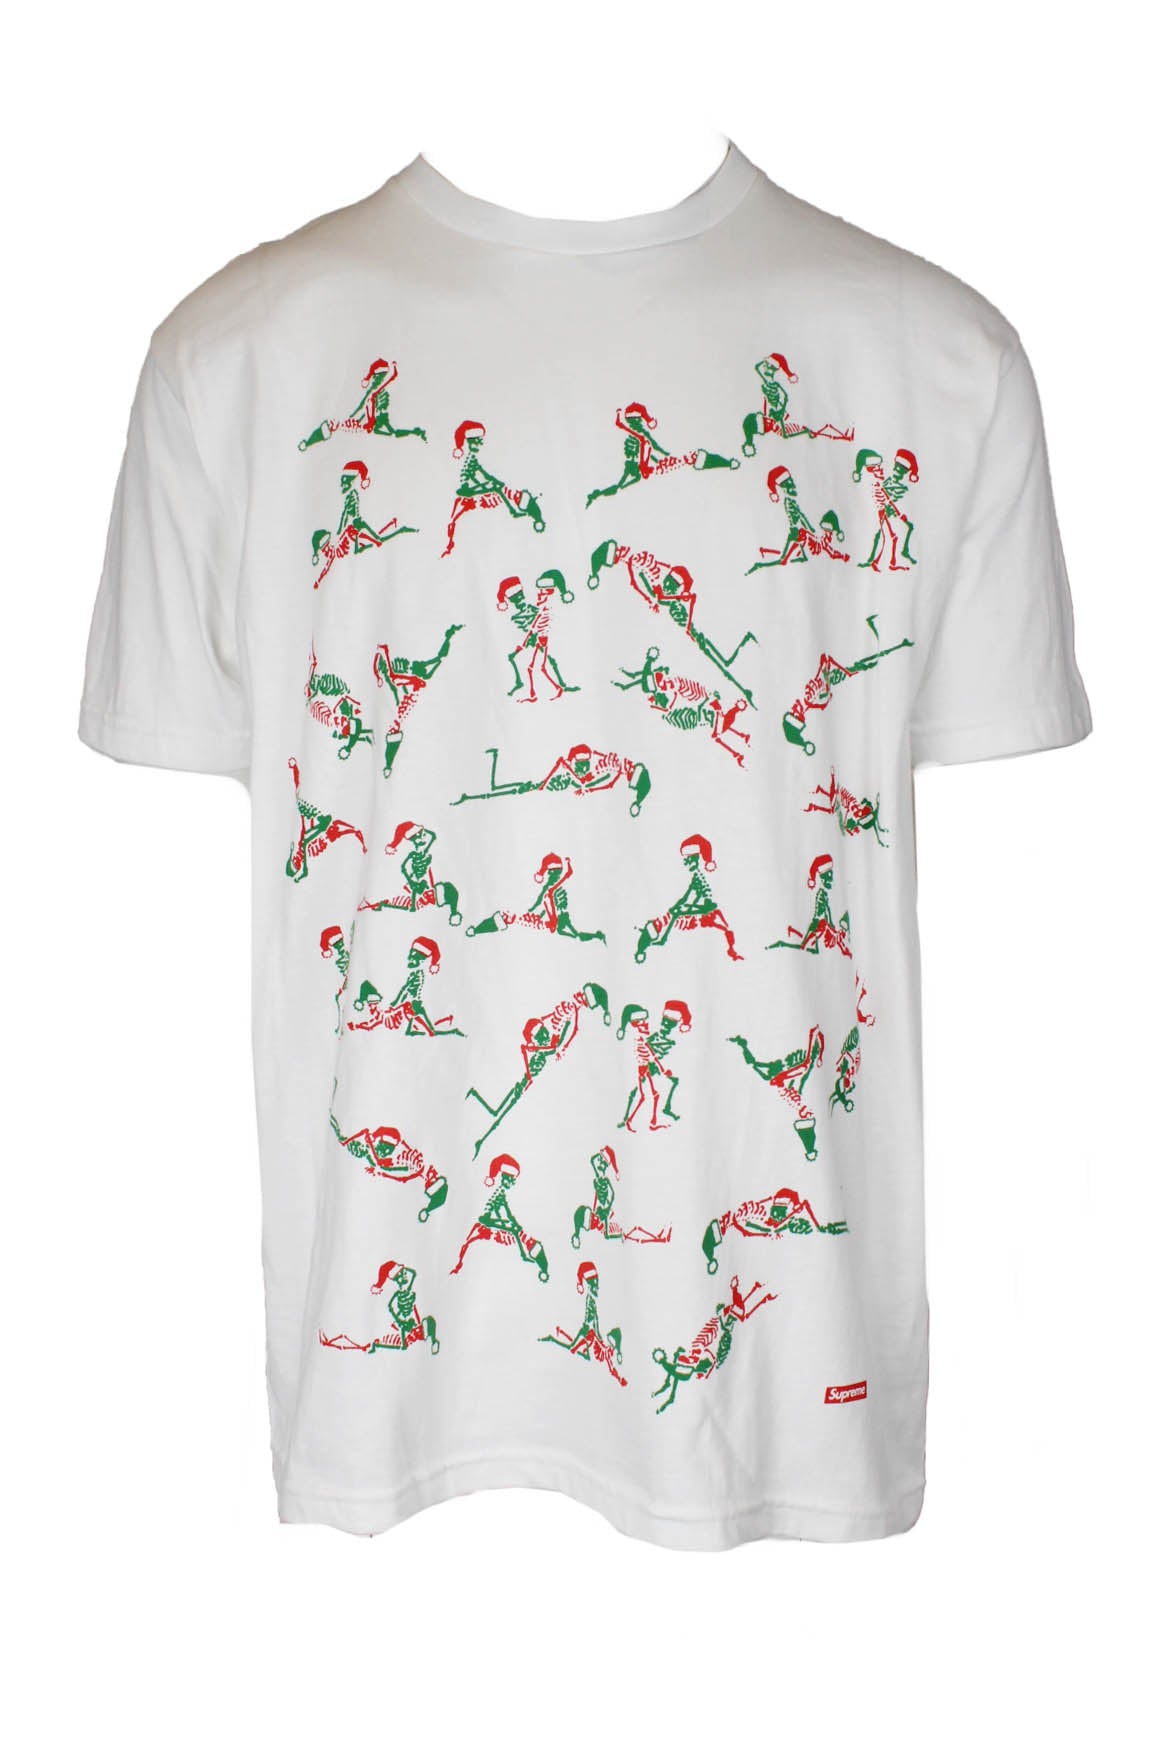 description: supreme white christmas short sleeve tee. features crew neckline, short sleeve, loose fit, straight bottom hem, and santa-cap skeletons kama sutra poses print at front. 